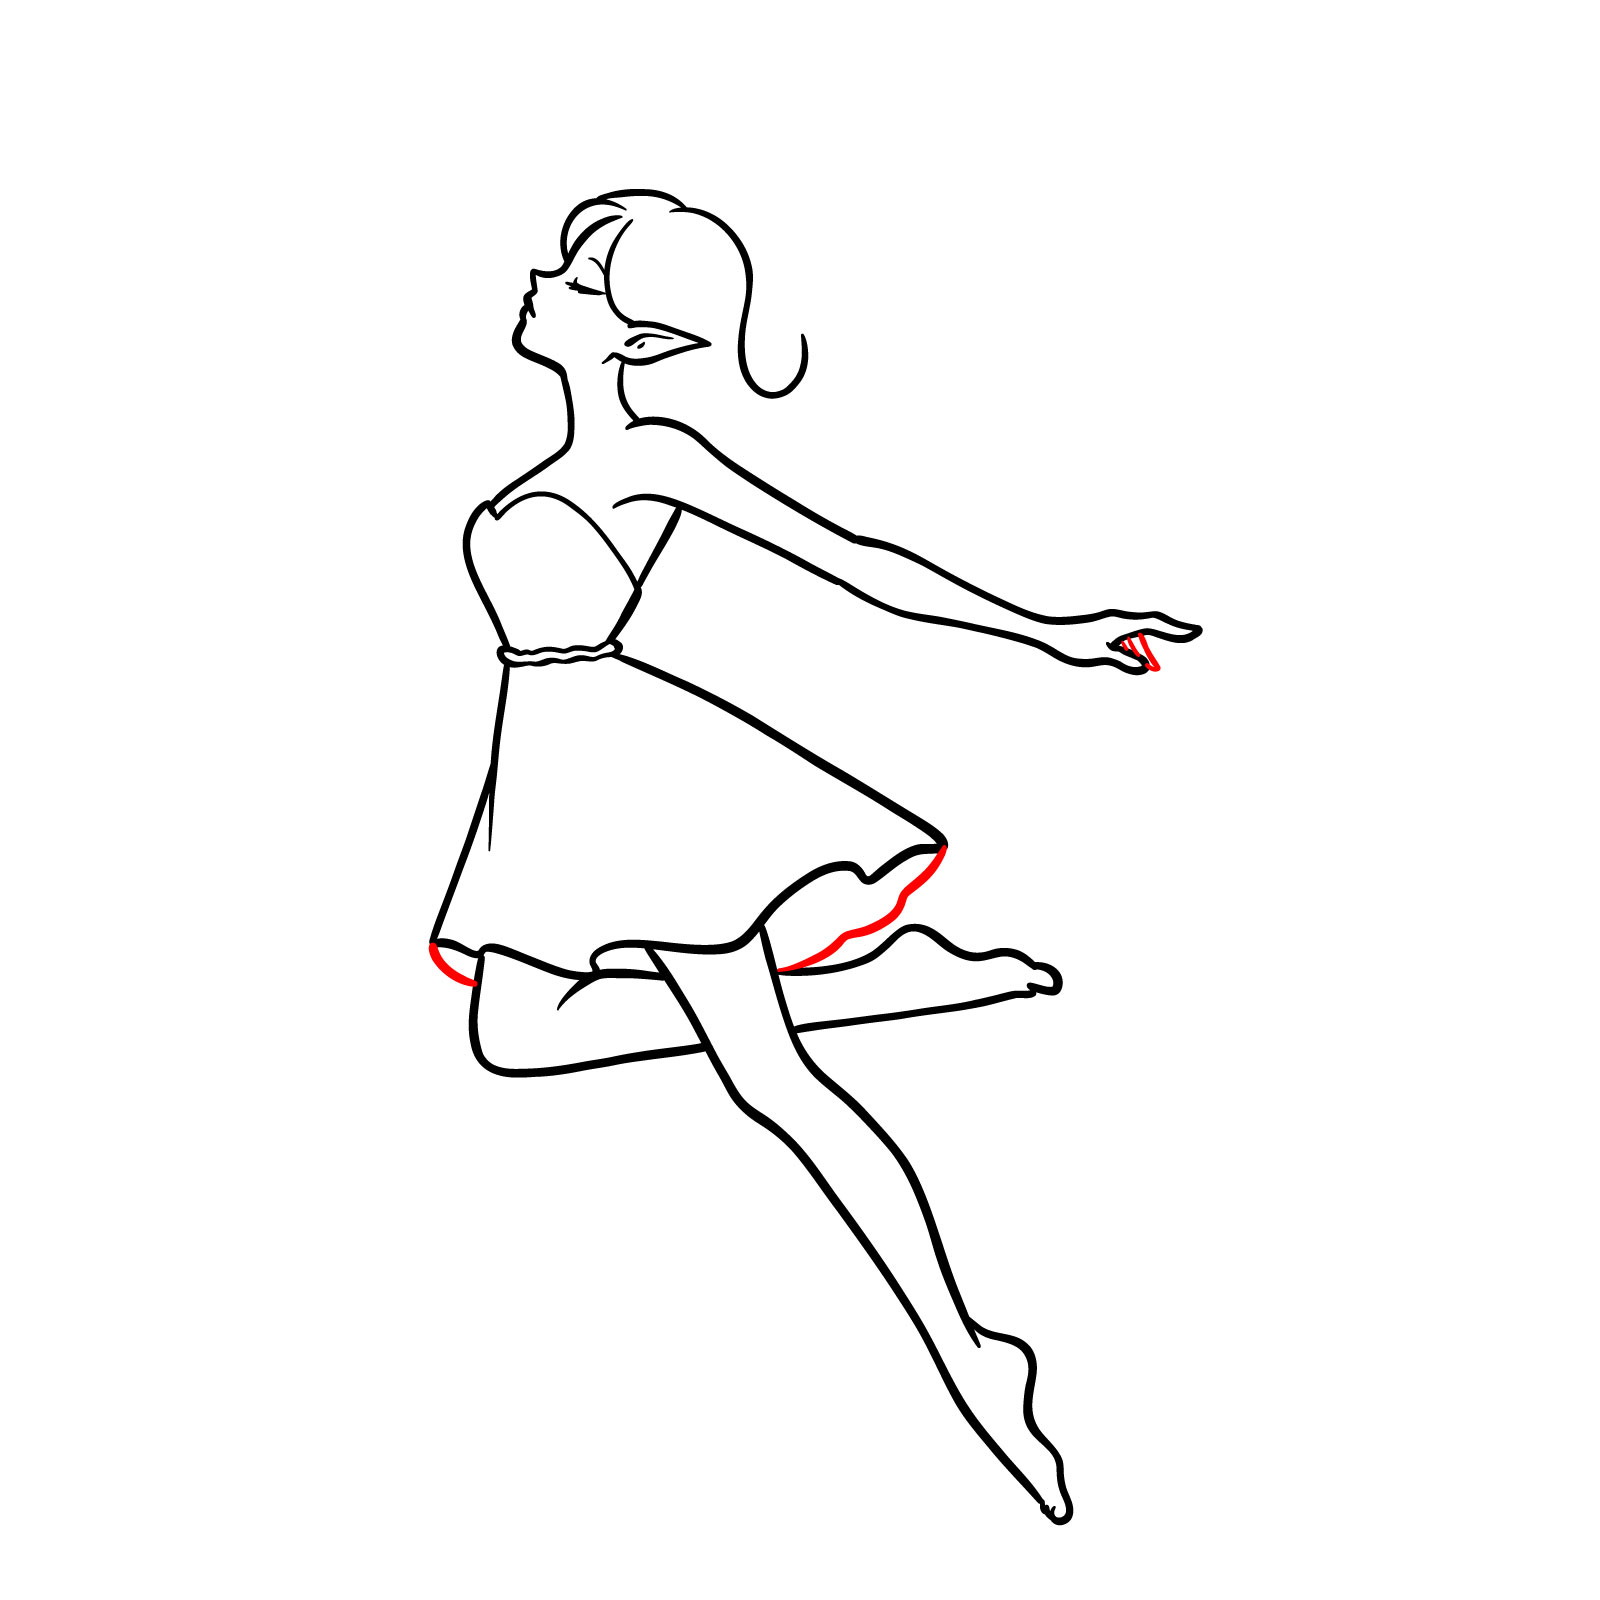 Drawing of a fairy with detailed fingers and skirt - step 10